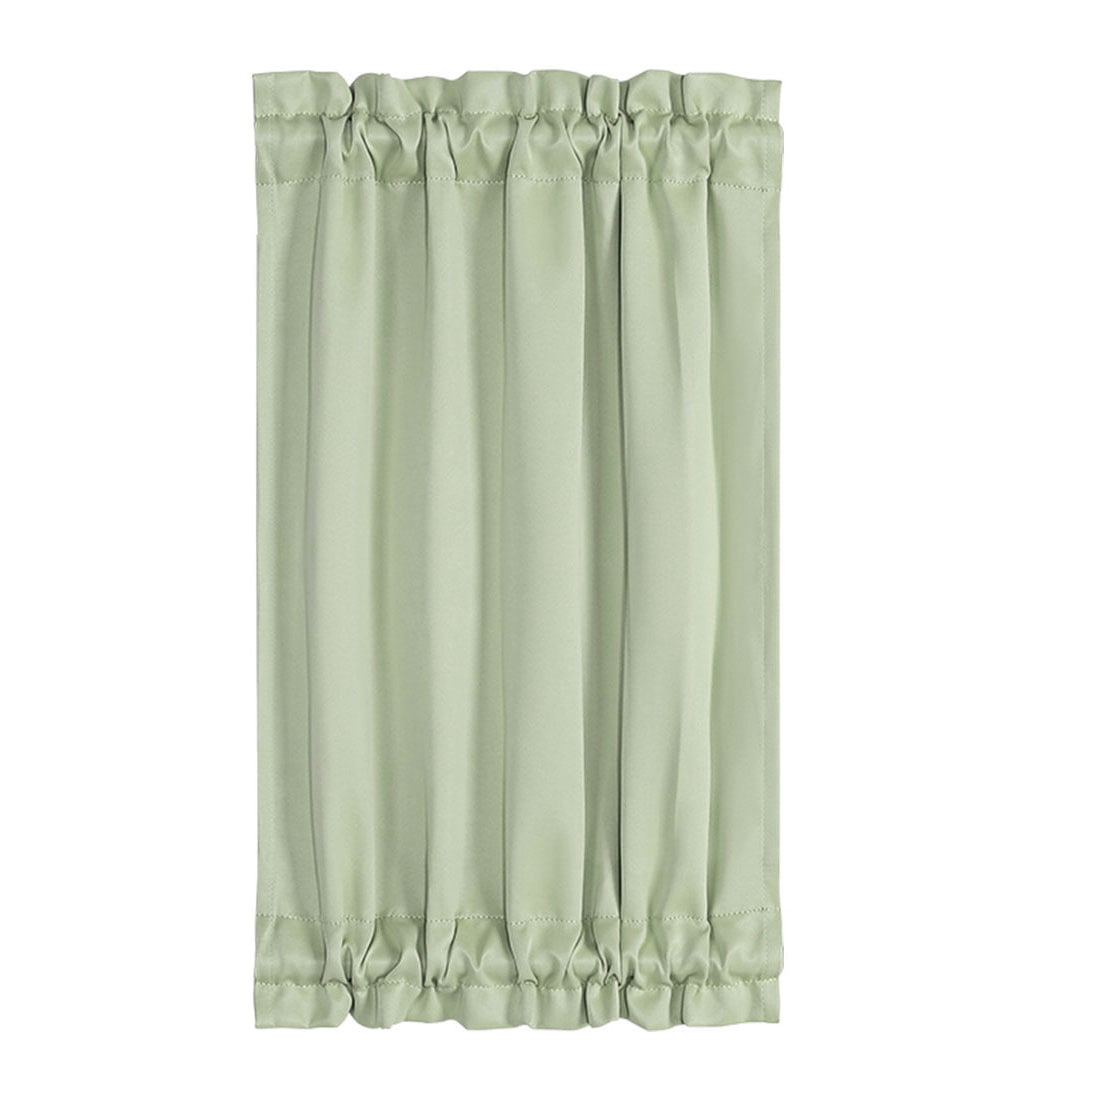 Details about   2/4/8Pcs Thermal Outdoor Curtain Panels Waterproof UV Sun Proof for Patio Porch 